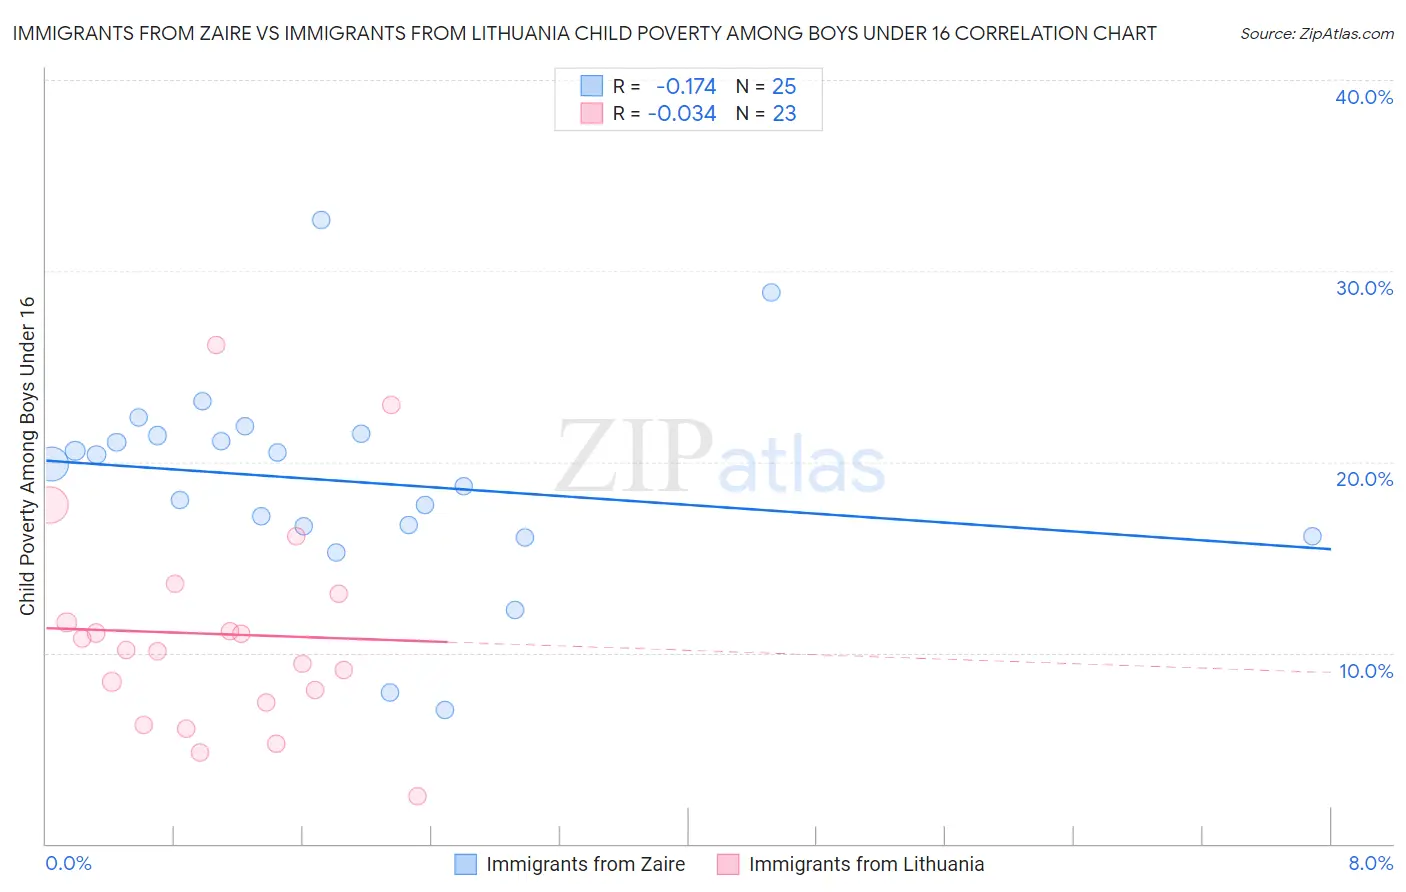 Immigrants from Zaire vs Immigrants from Lithuania Child Poverty Among Boys Under 16